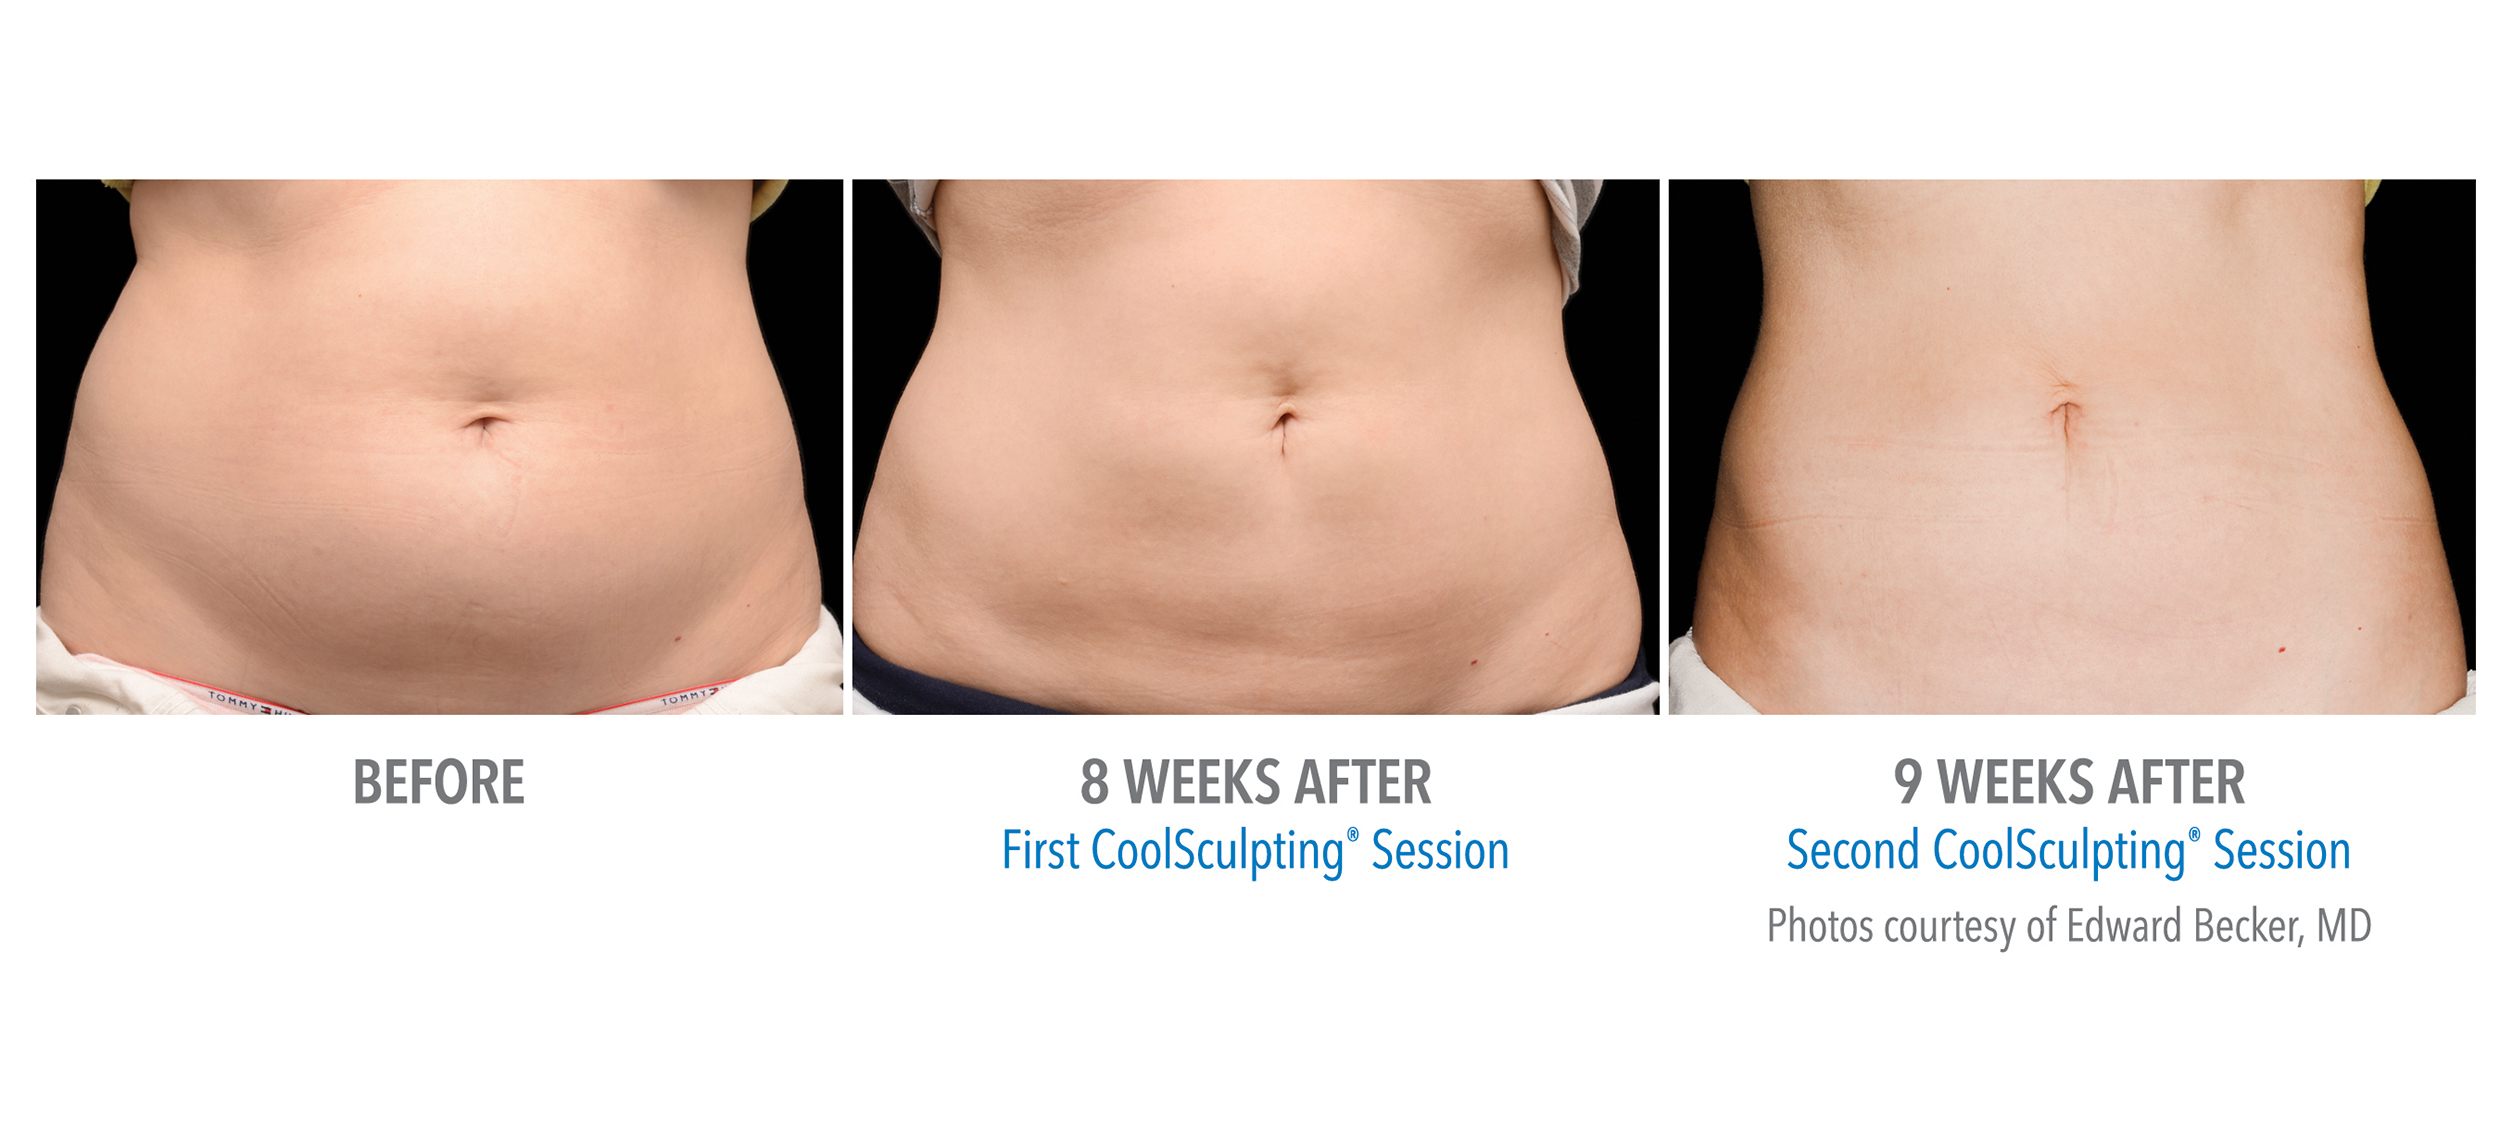 CoolSculpting Before & After Photos | Abdomen 1